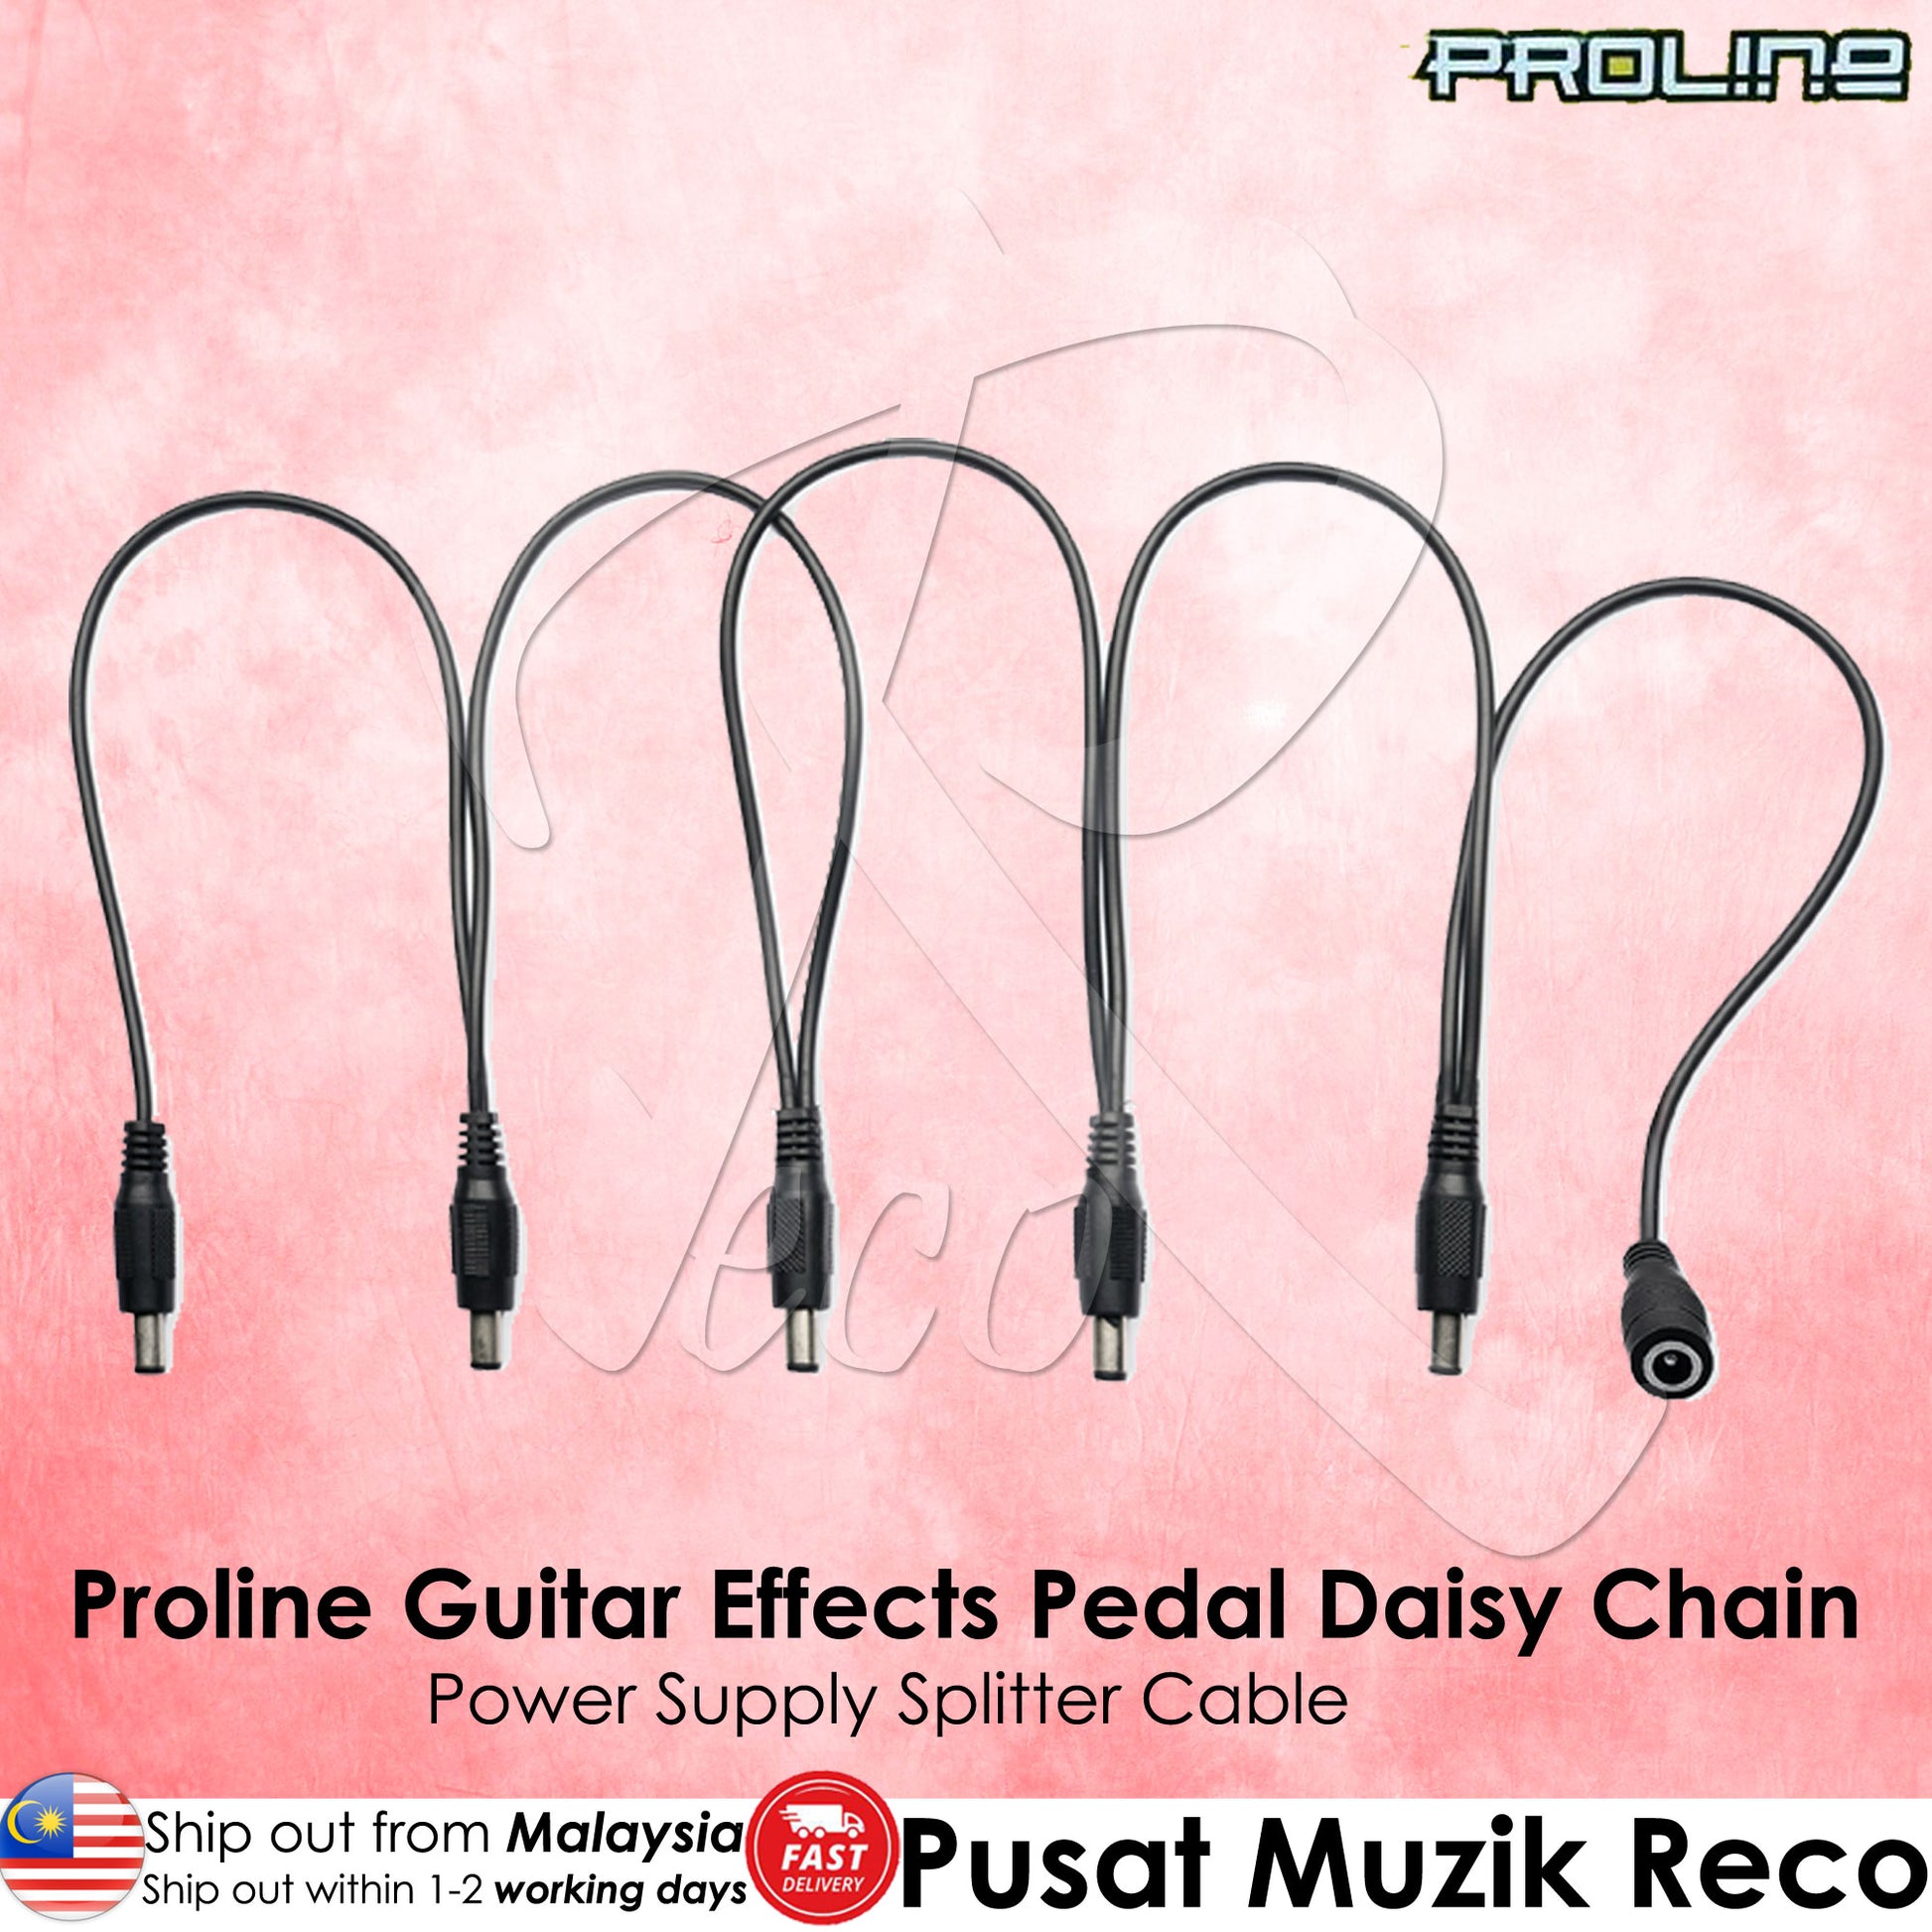 Proline EXCS-5 Guitar Effects Pedal Daisy Chain Cable | Recomusic